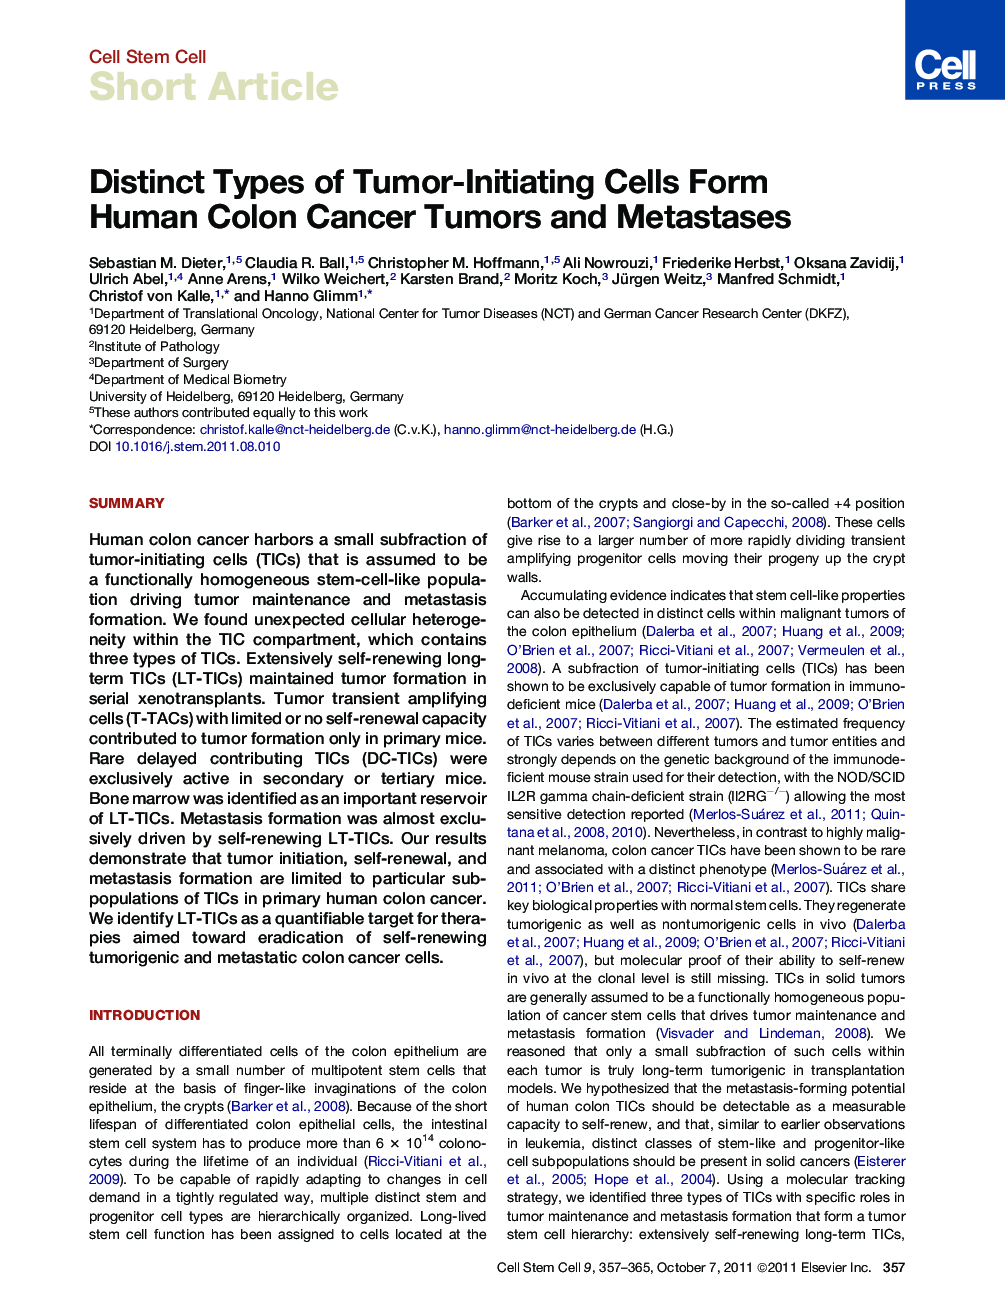 Distinct Types of Tumor-Initiating Cells Form Human Colon Cancer Tumors and Metastases